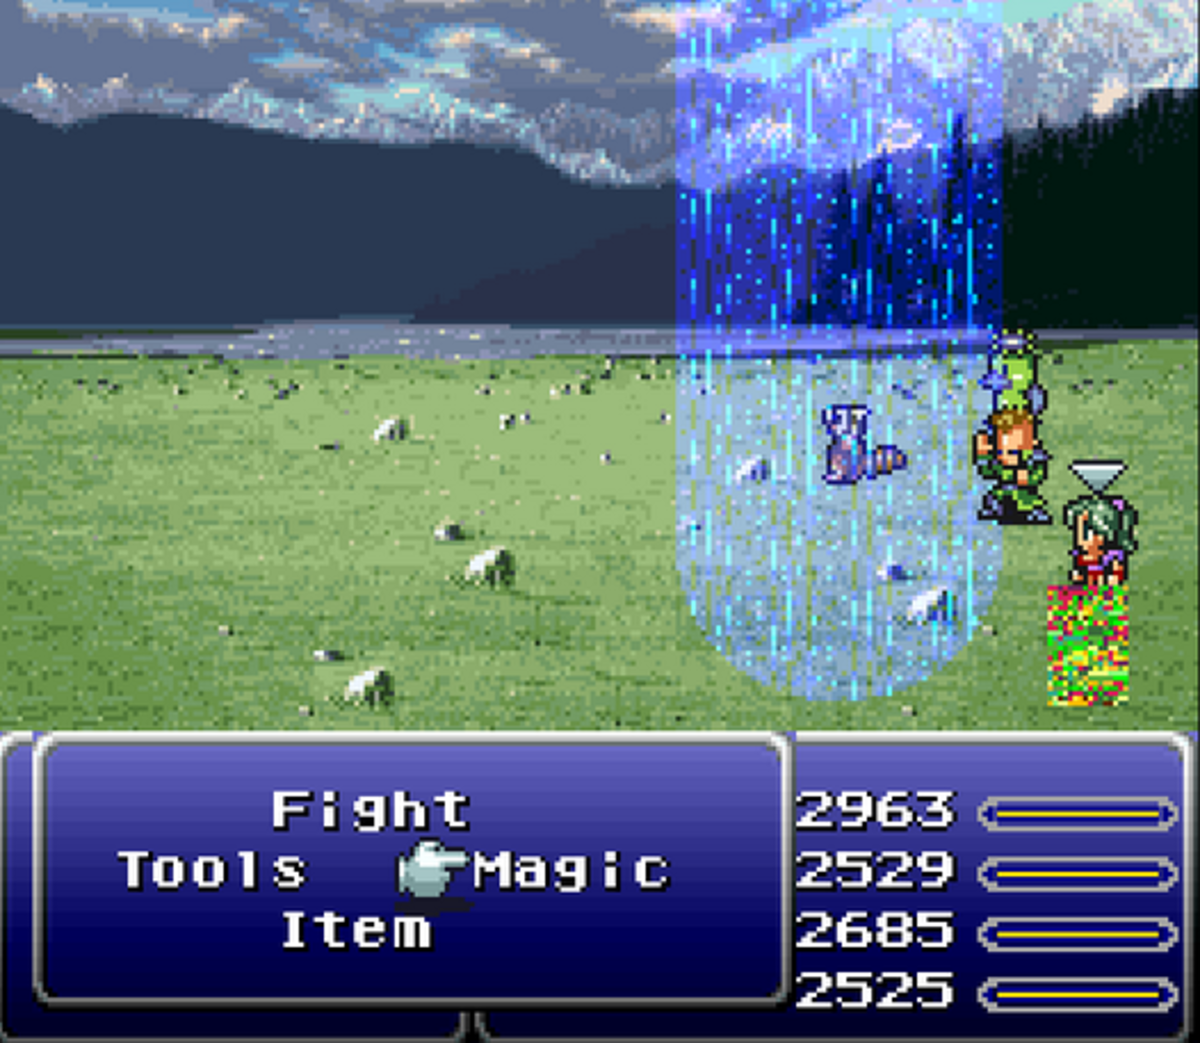 10-of-the-most-powerful-literary-moments-in-final-fantasy-you-may-have-missed